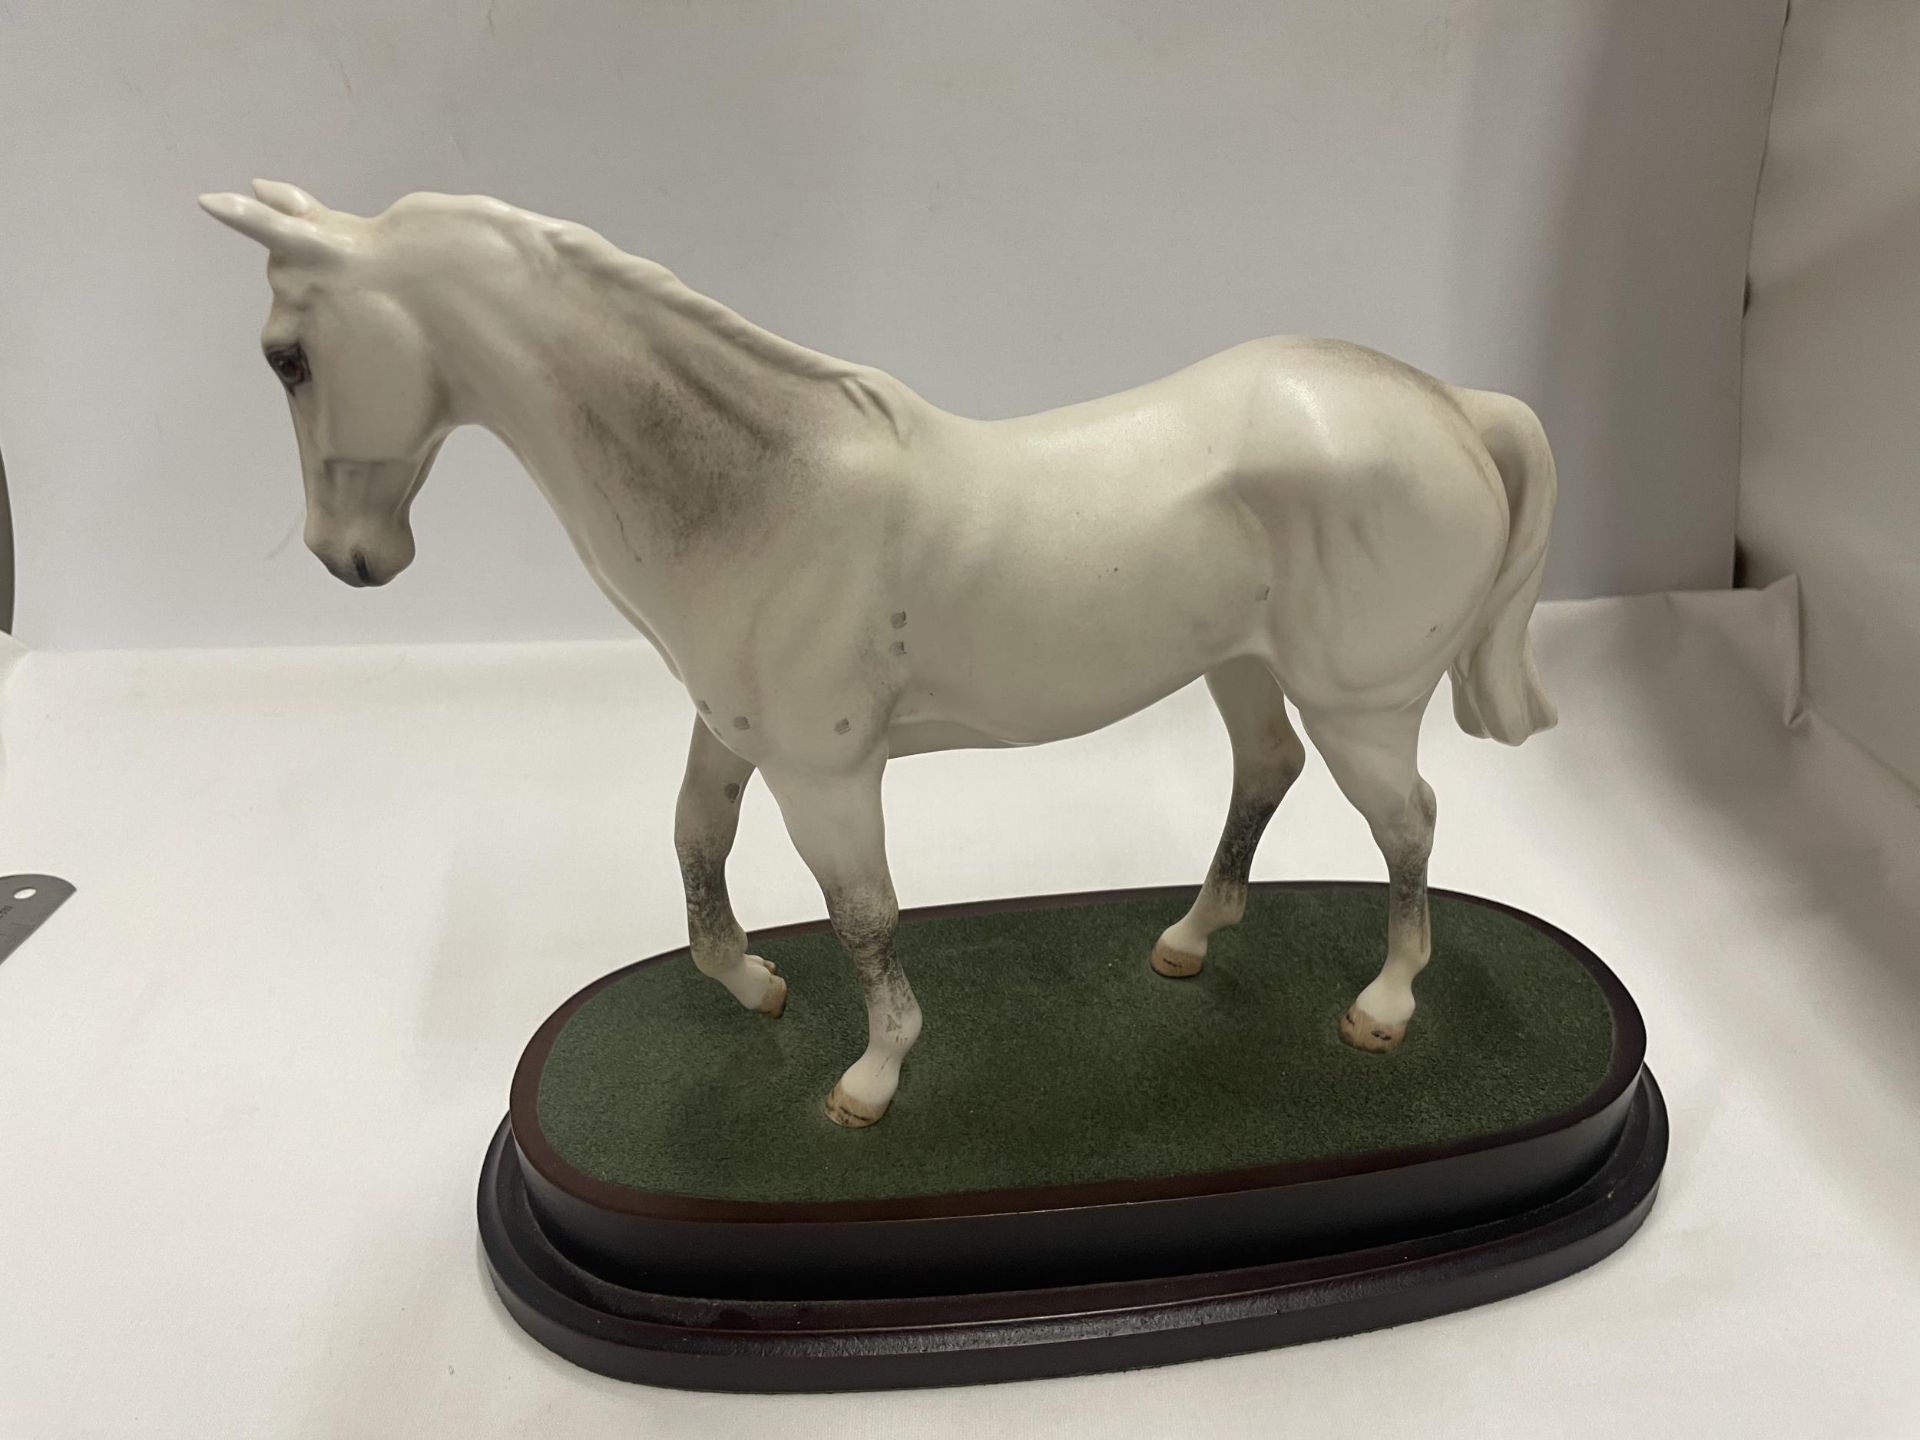 A ROYAL DOULTON DESERT ORCHID FIGURE ON A PLINTH (SECOND) - Image 2 of 3